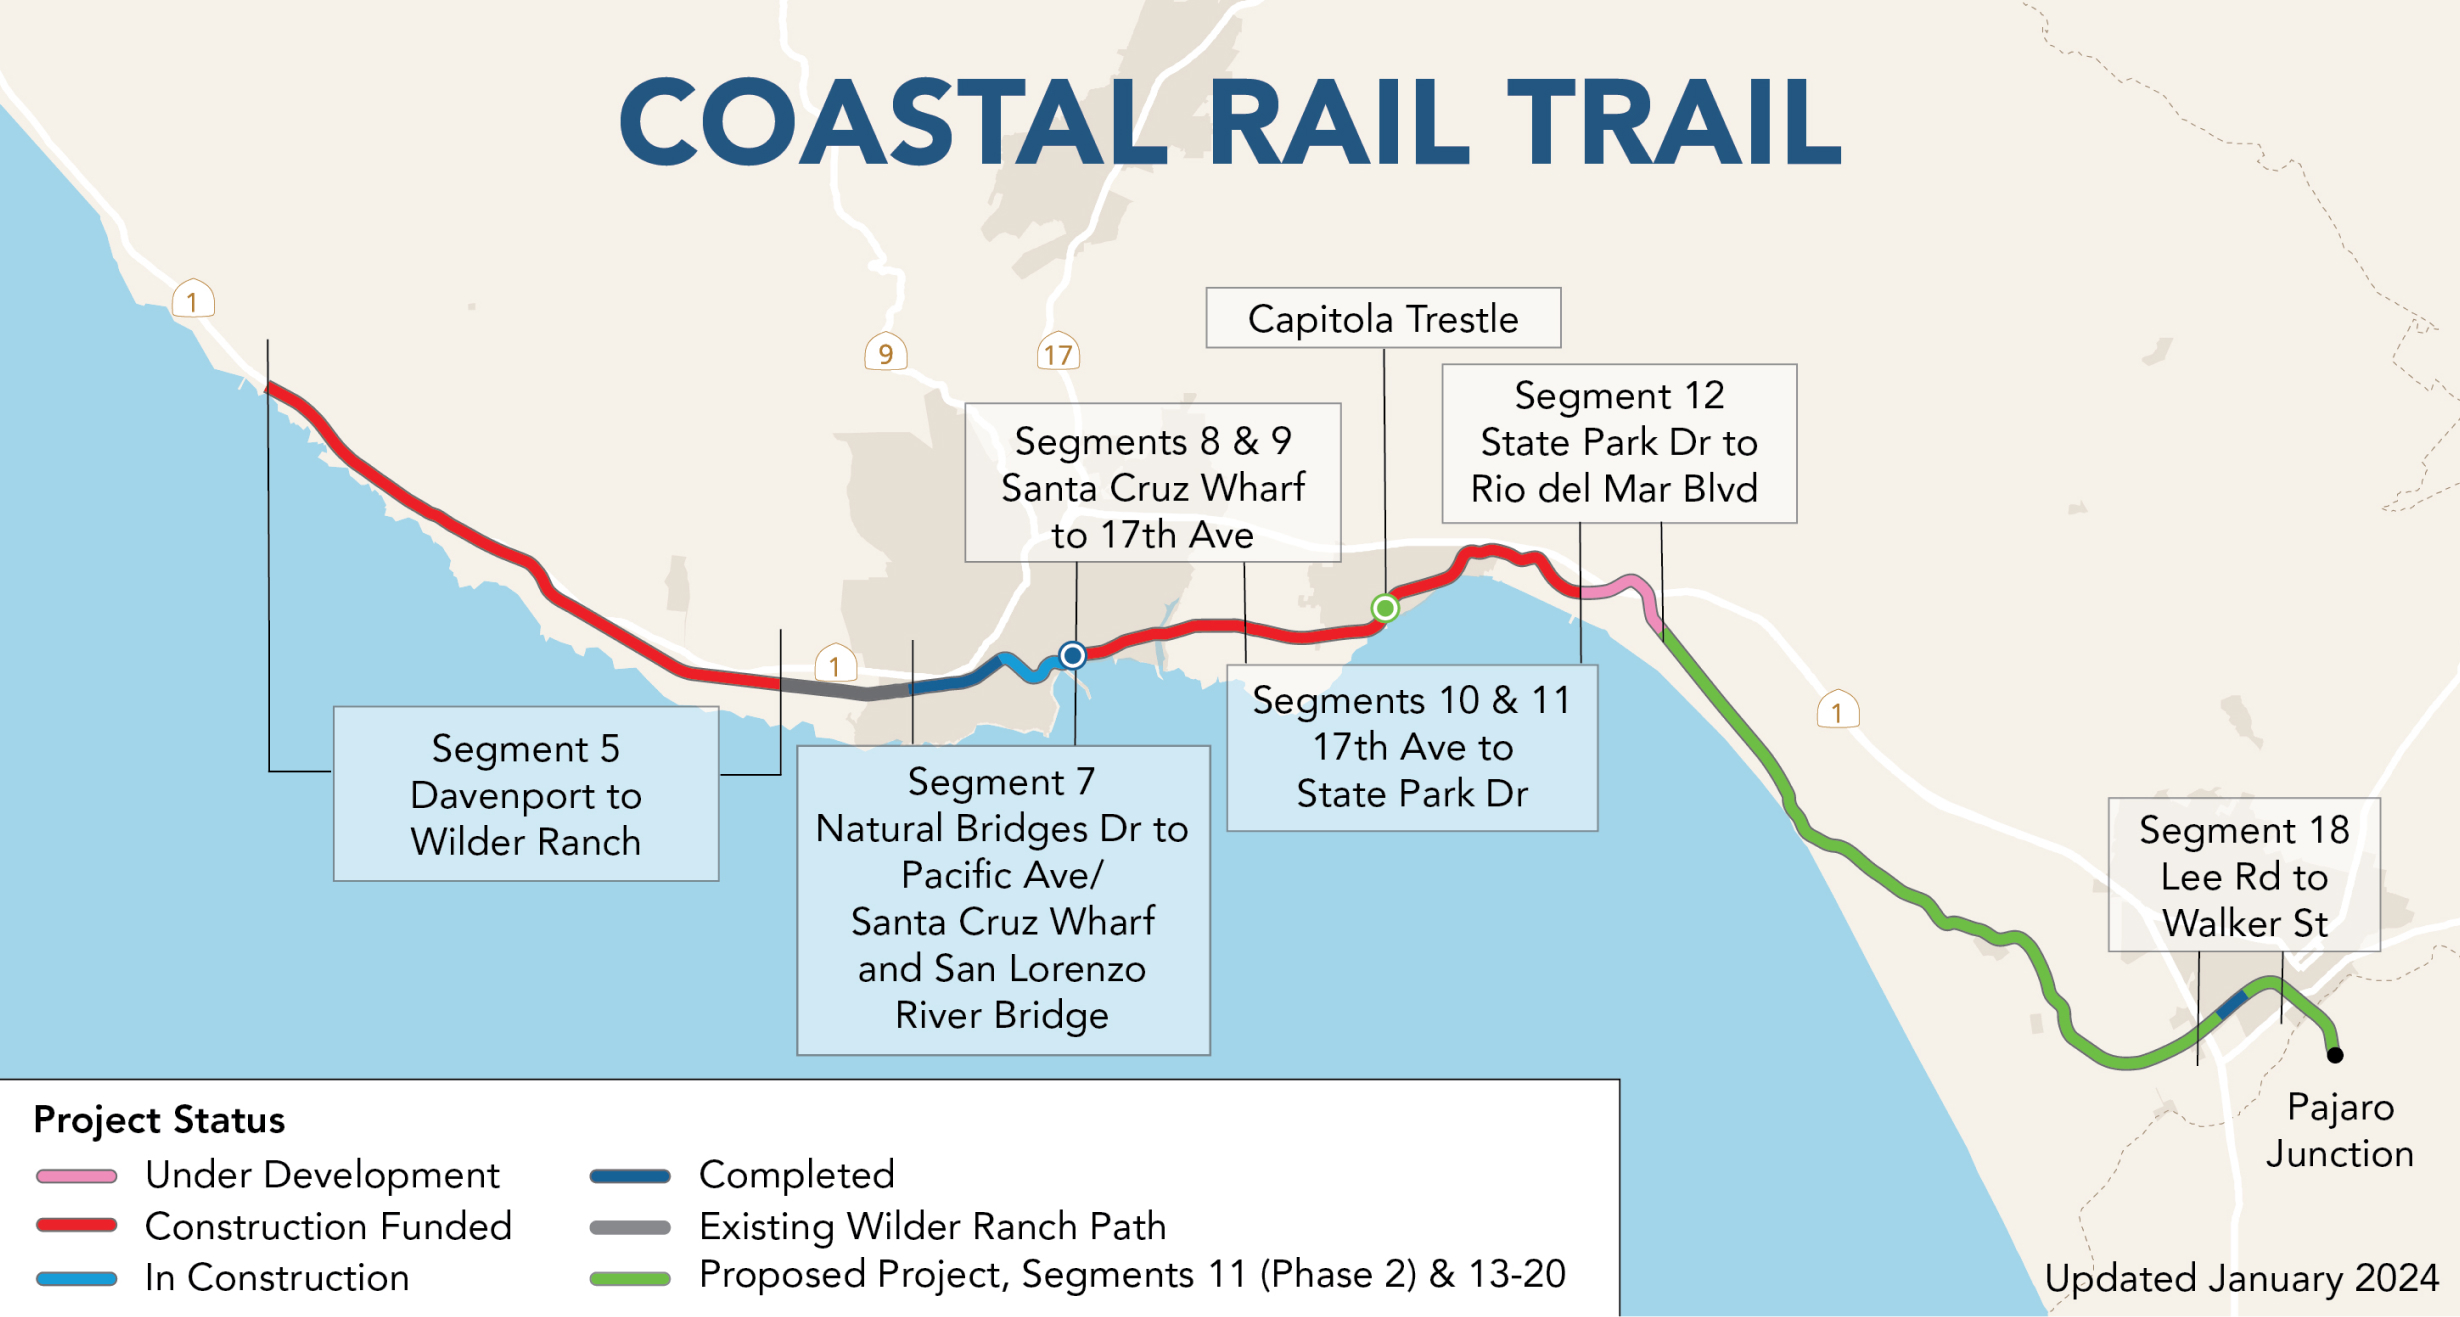 Image of a map showing the Coastal Rail Trail alignment, using colors to indicate status of the Coastal Rail Trail projects by segment, many of which are being implemented by others as separate projects. The proposed project includes Segment 11, Phase 2 and Segments 13 through 20.